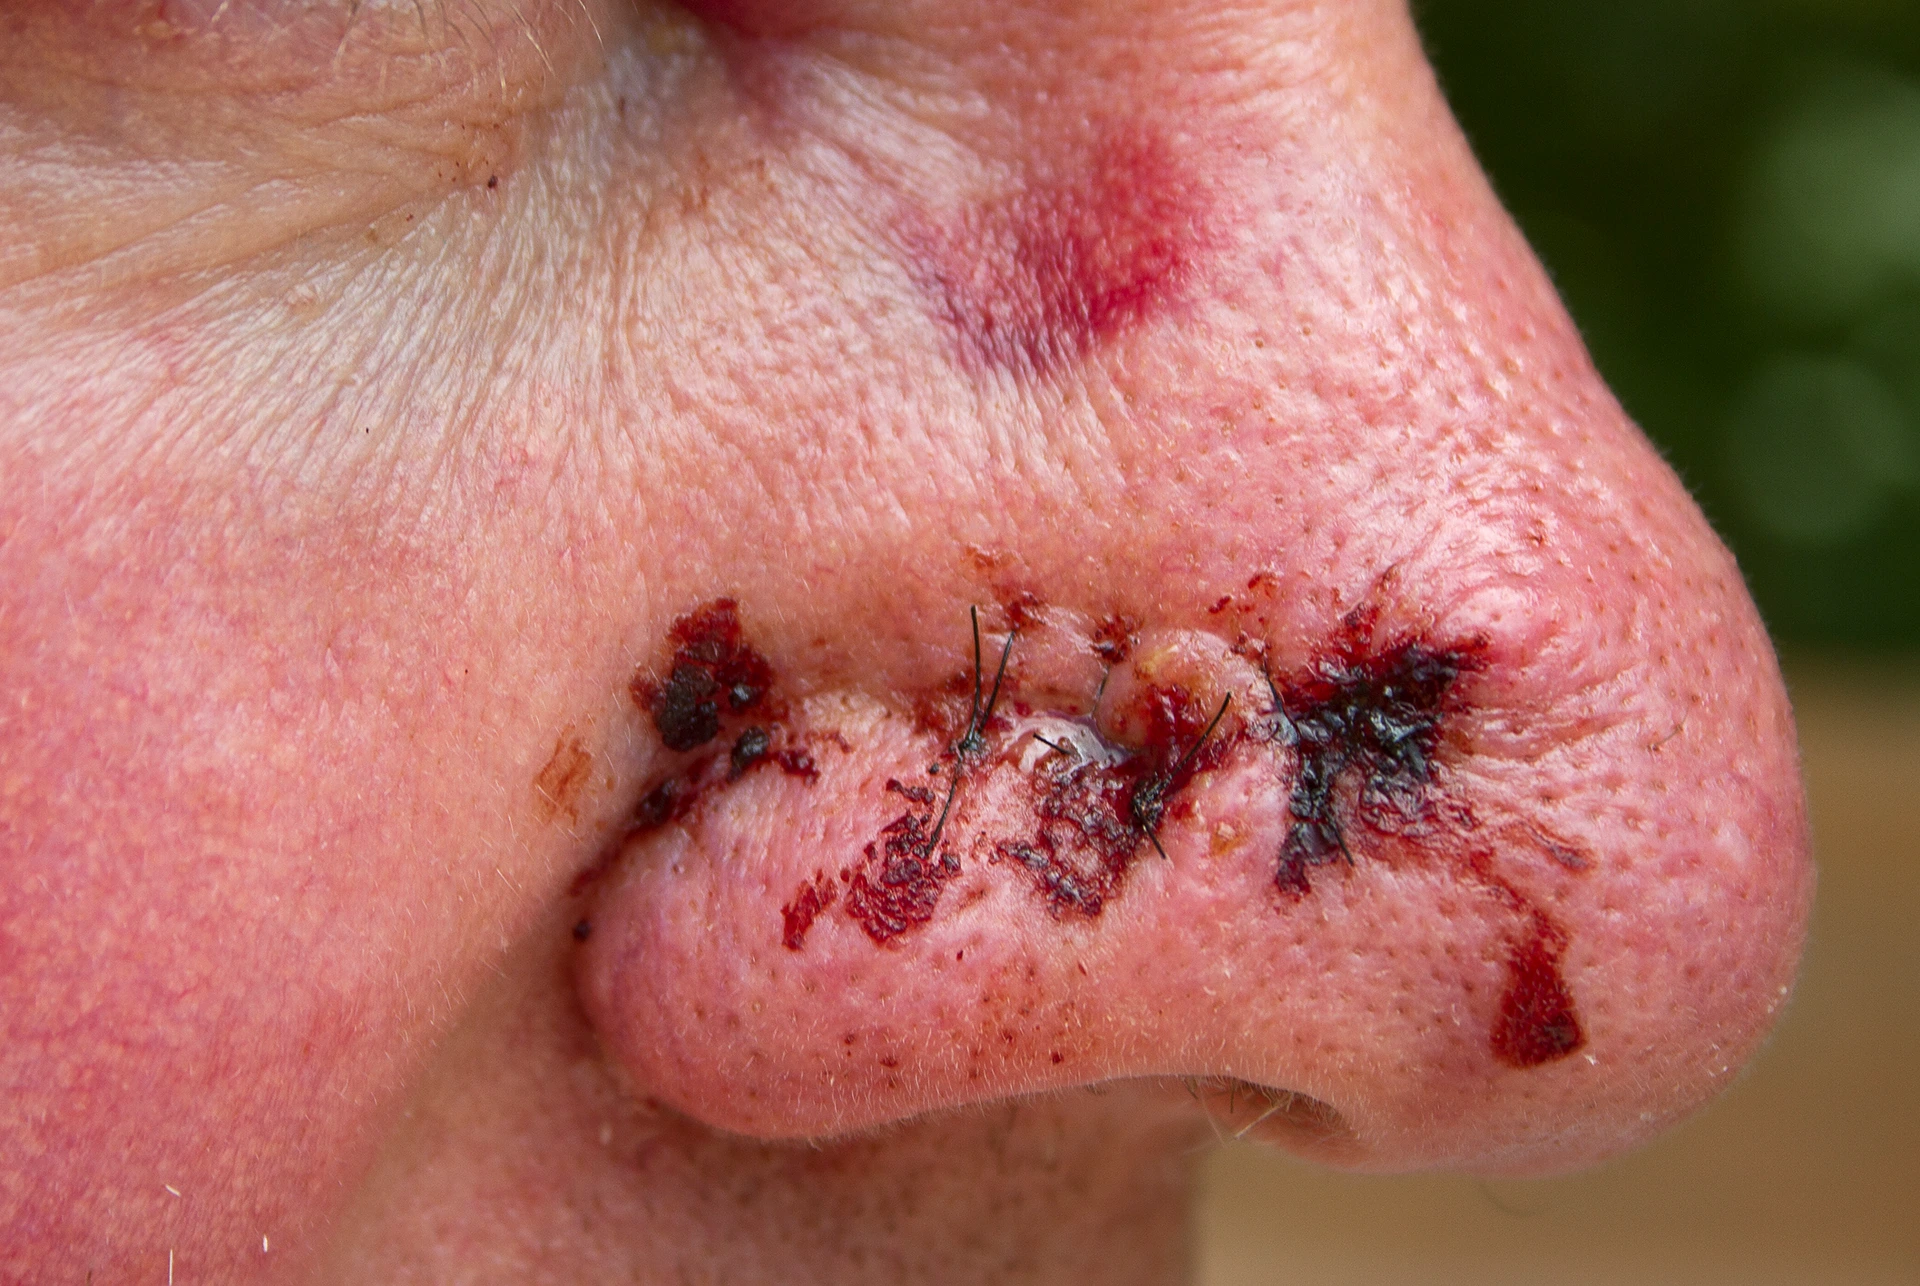 A close up of a man's nose with blood on it.